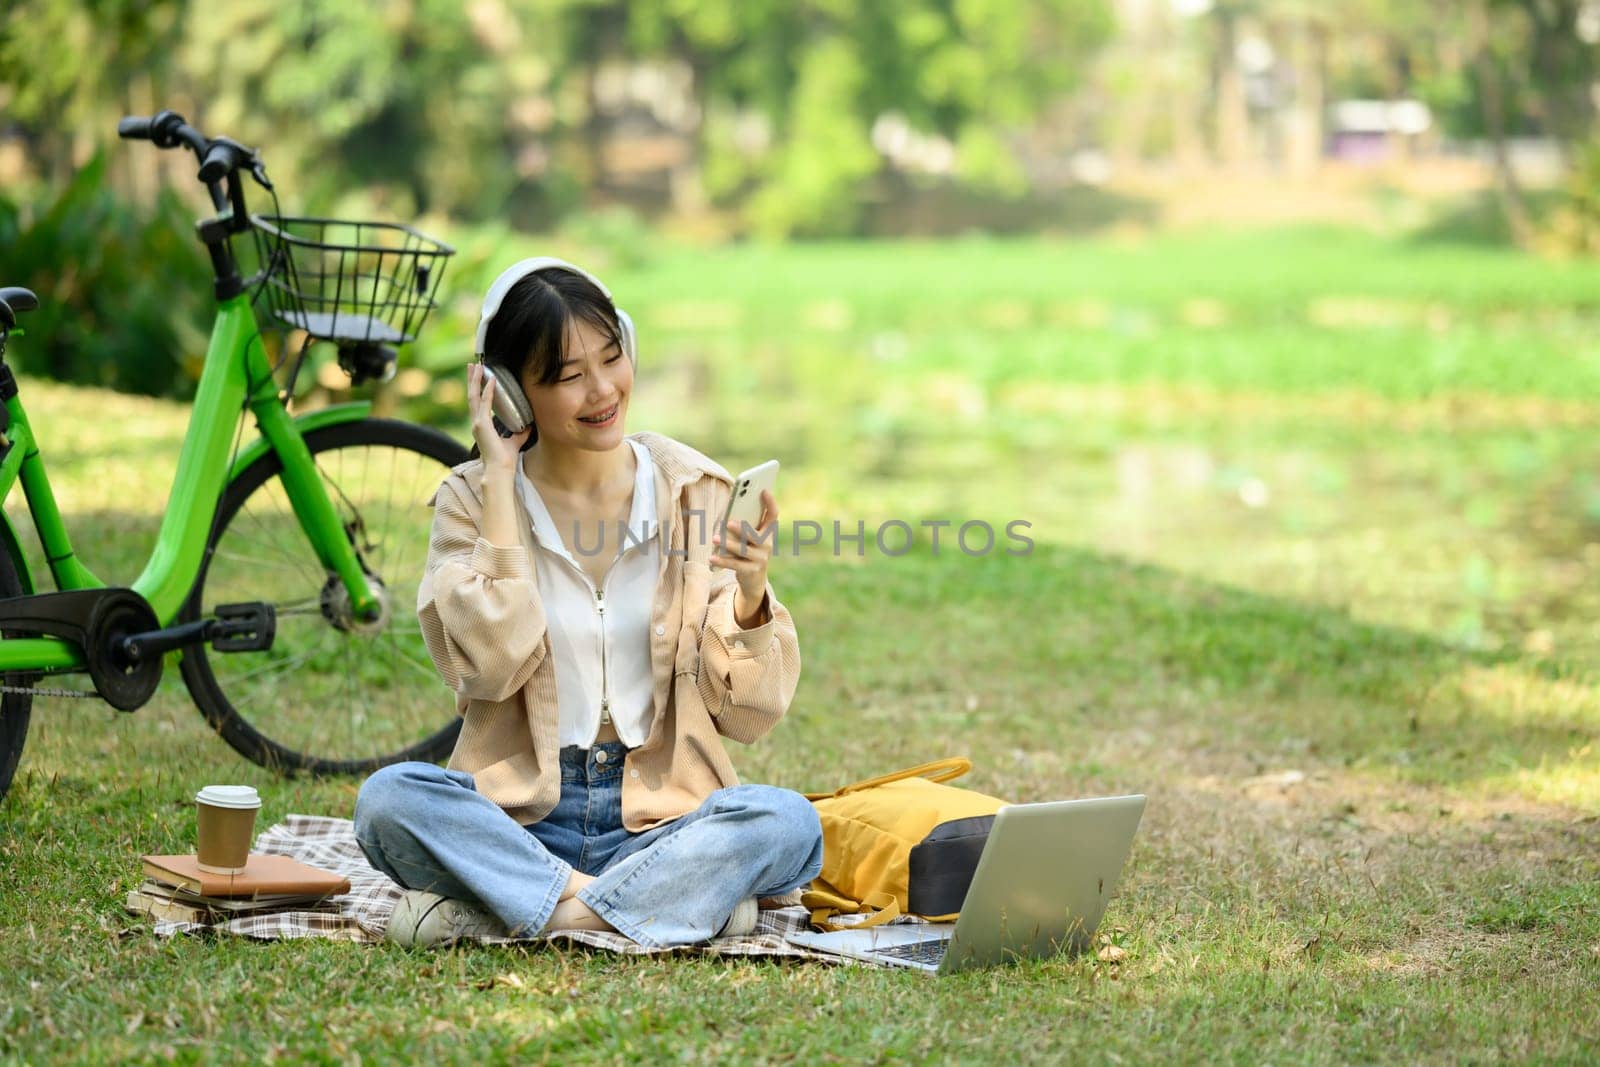 Happy young woman listening to music and using mobile phone on picnic blanket.